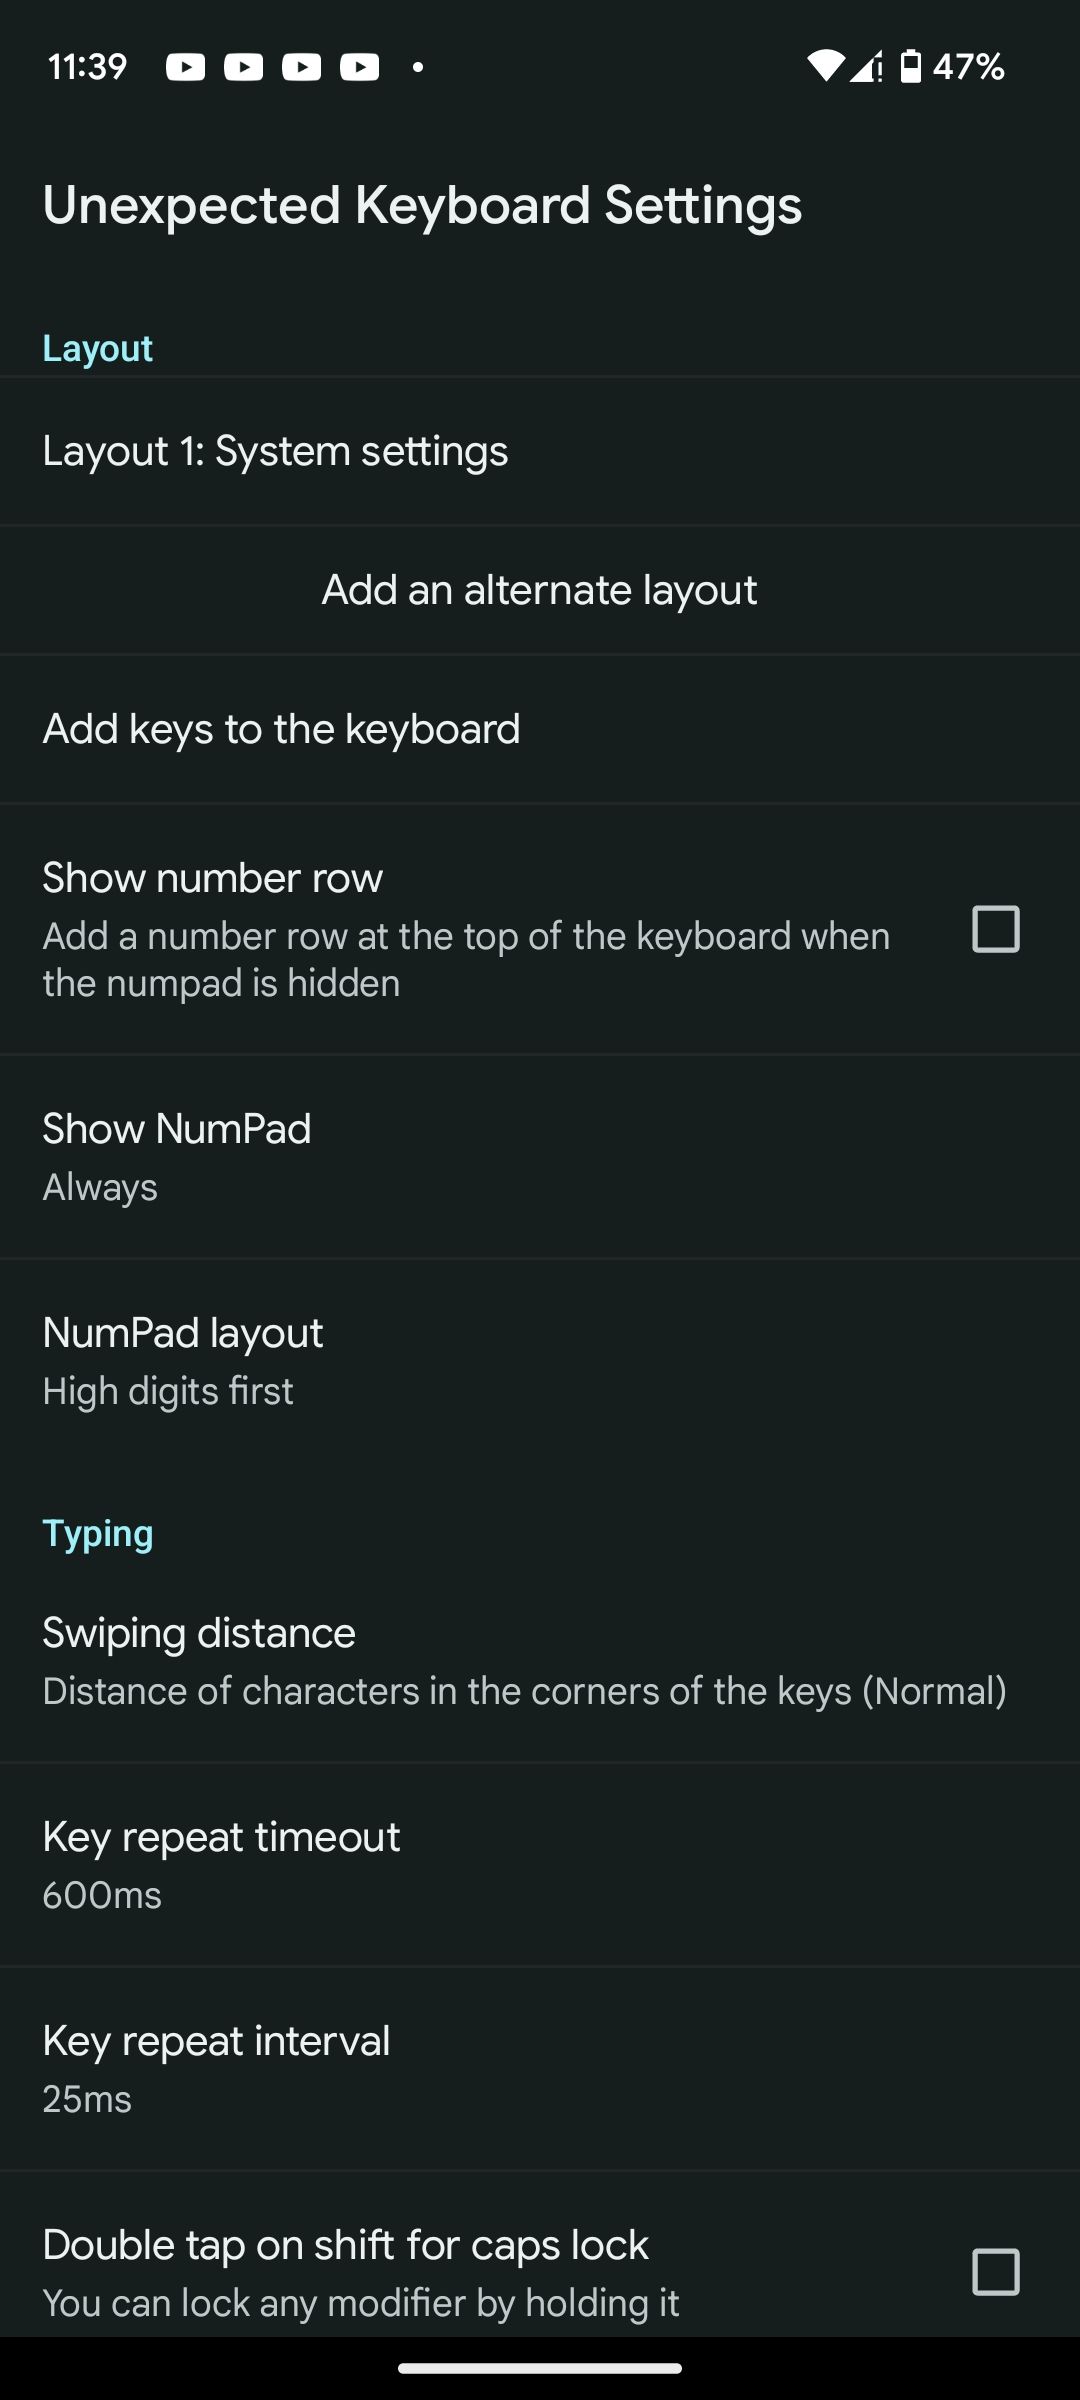 Keyboard settings and preferences for Unexpected Keyboard app